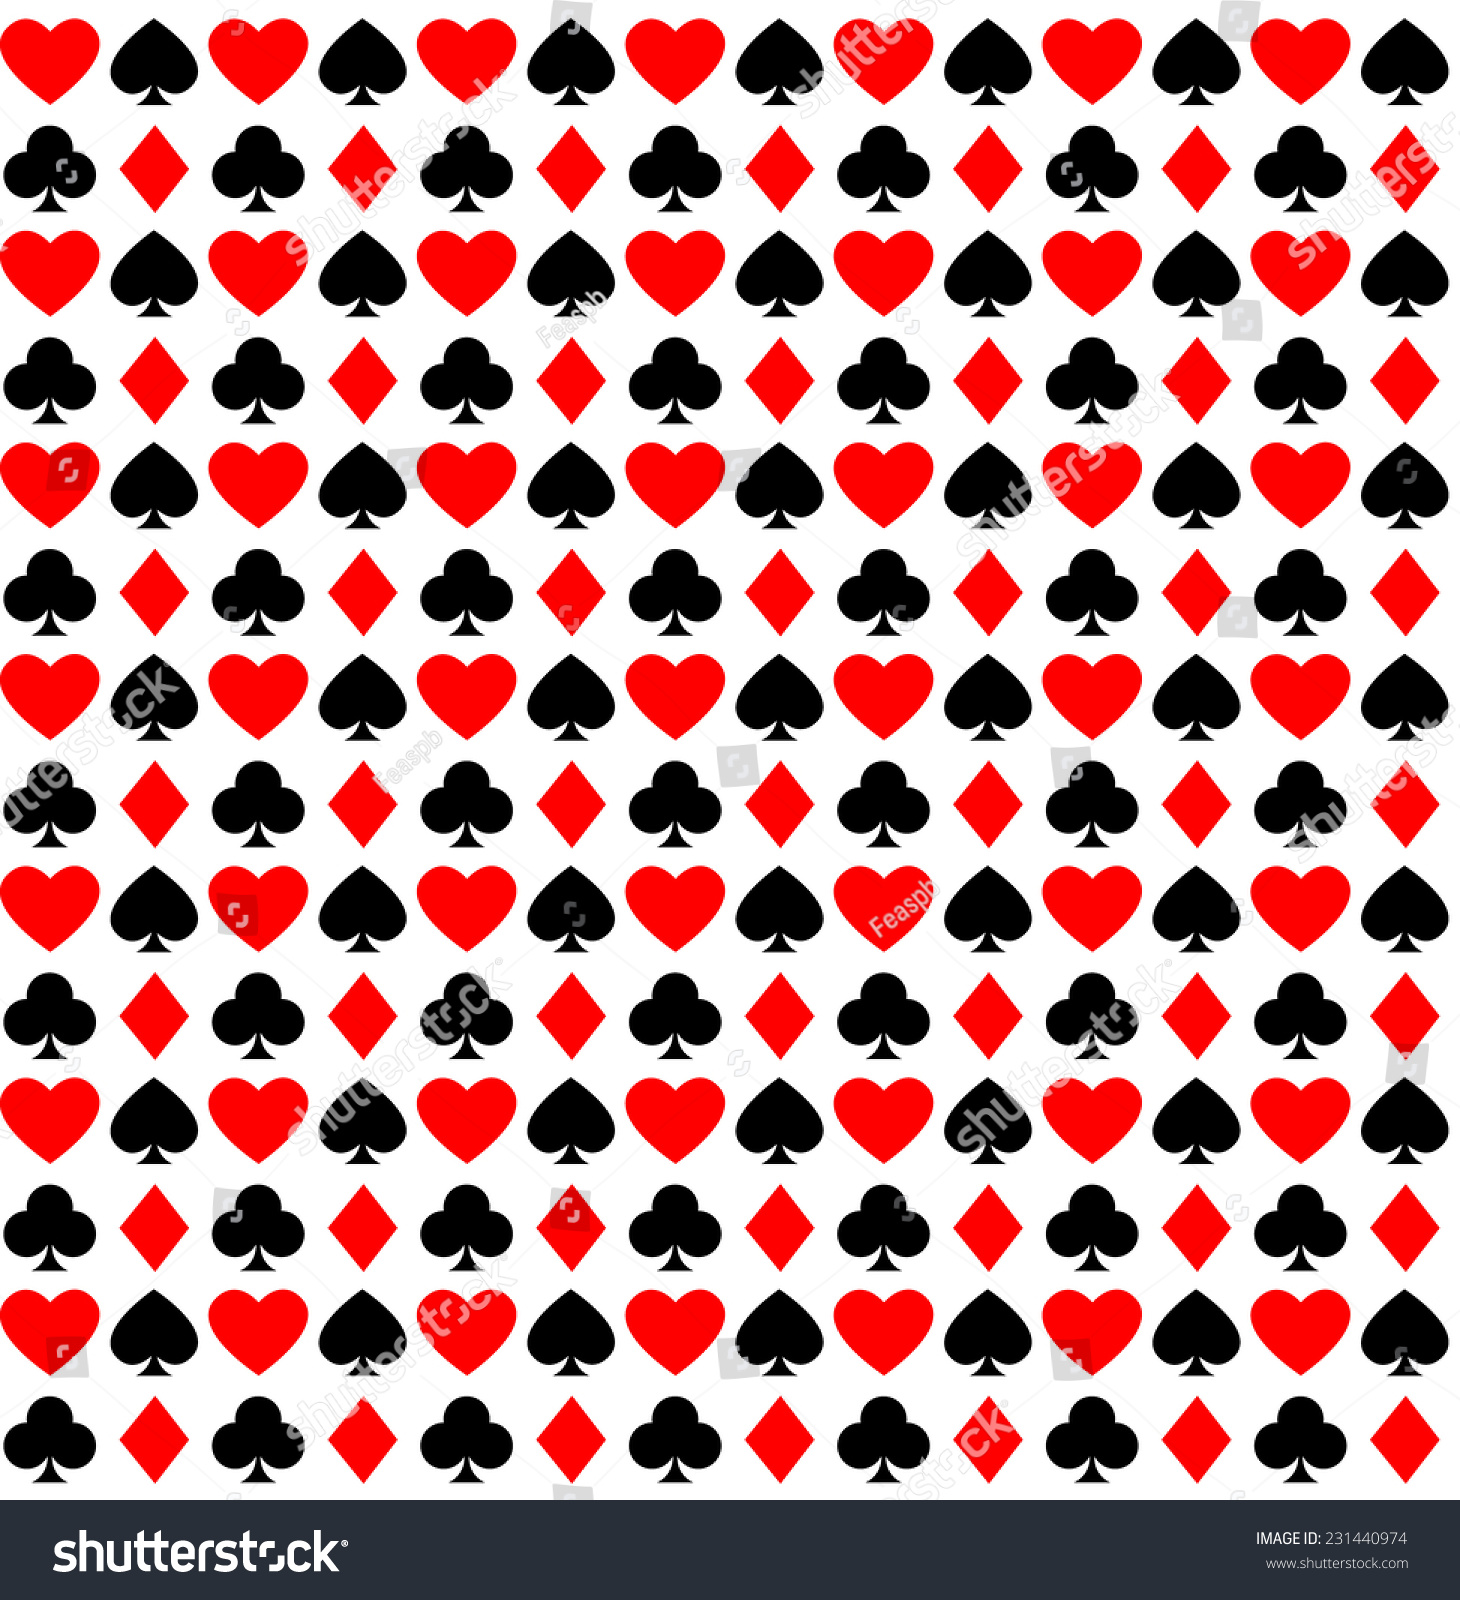 Card Suits Seamless Pattern. Vector Illustration - 231440974 : Shutterstock